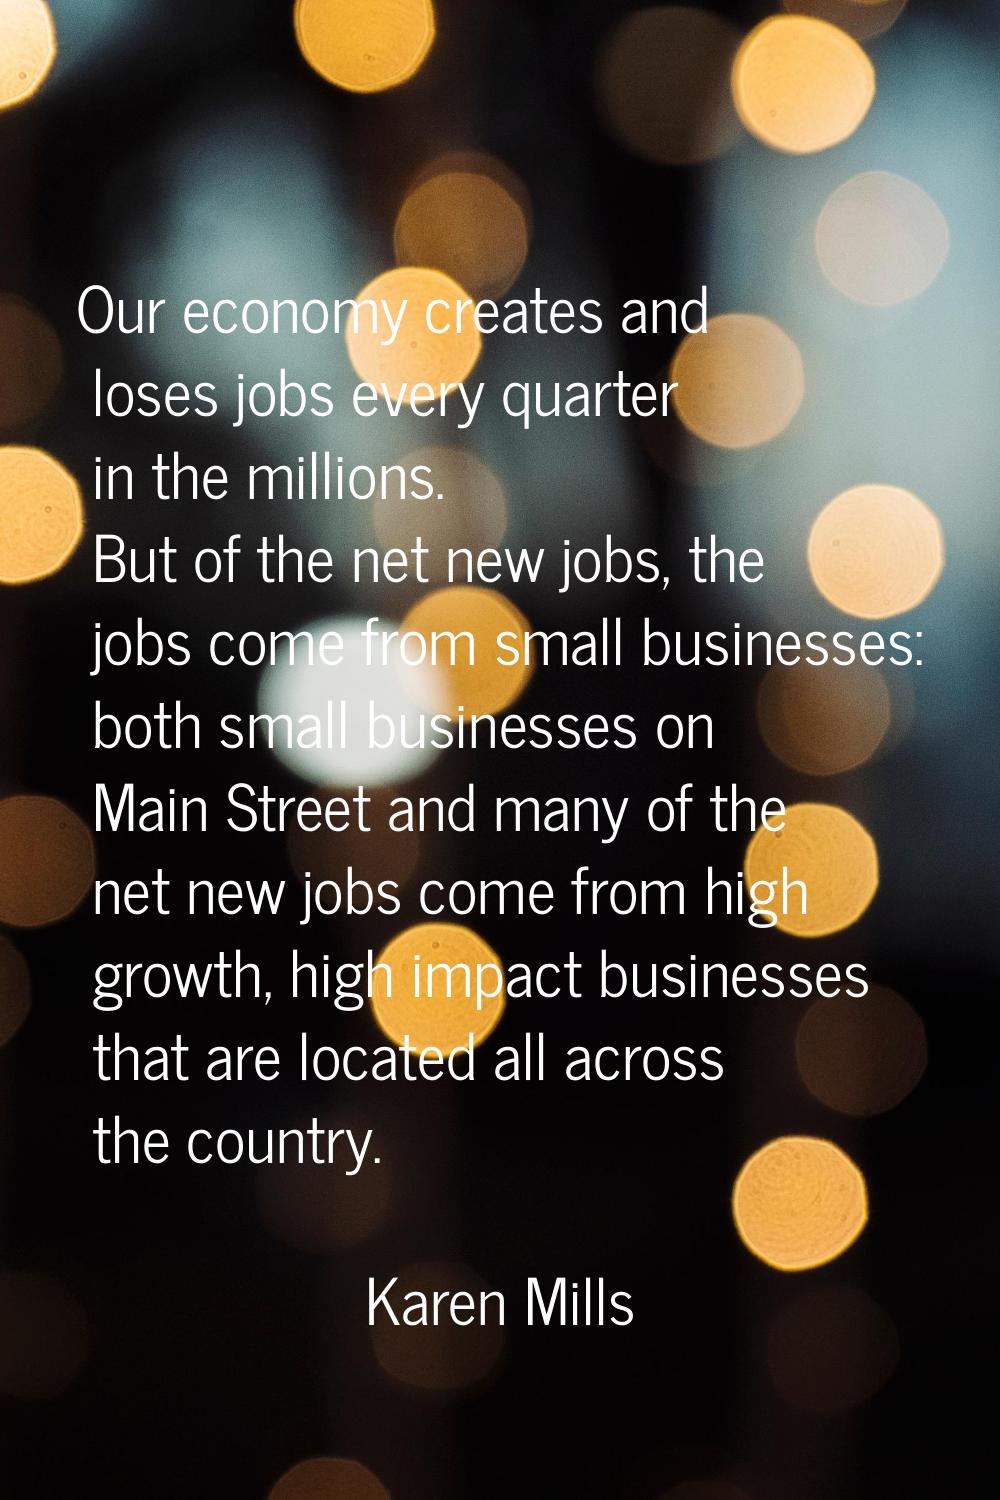 Our economy creates and loses jobs every quarter in the millions. But of the net new jobs, the jobs